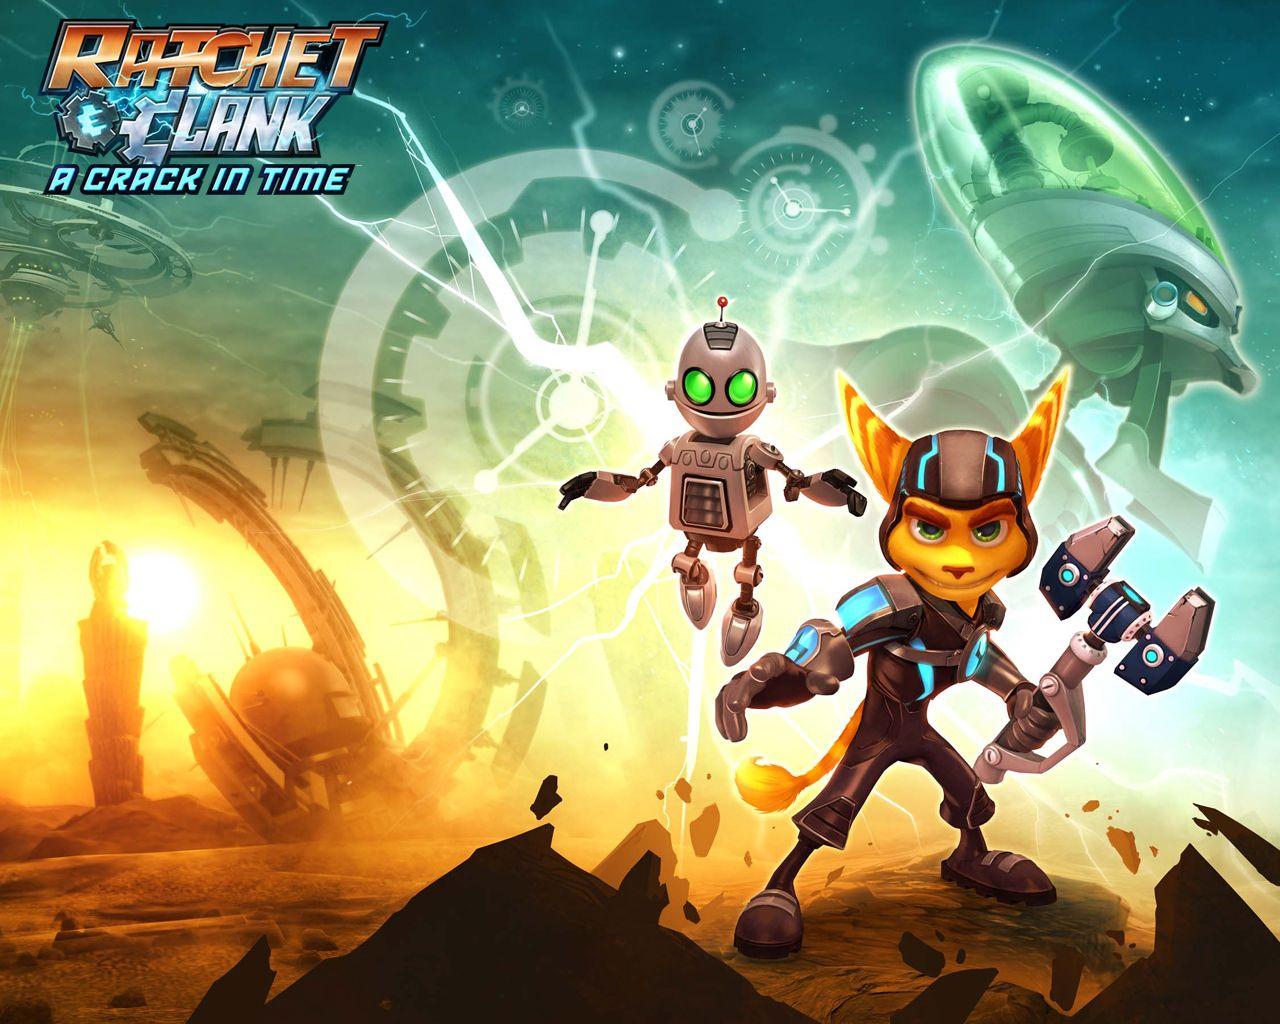 Wallpaper & Clank Future: A Crack In Time